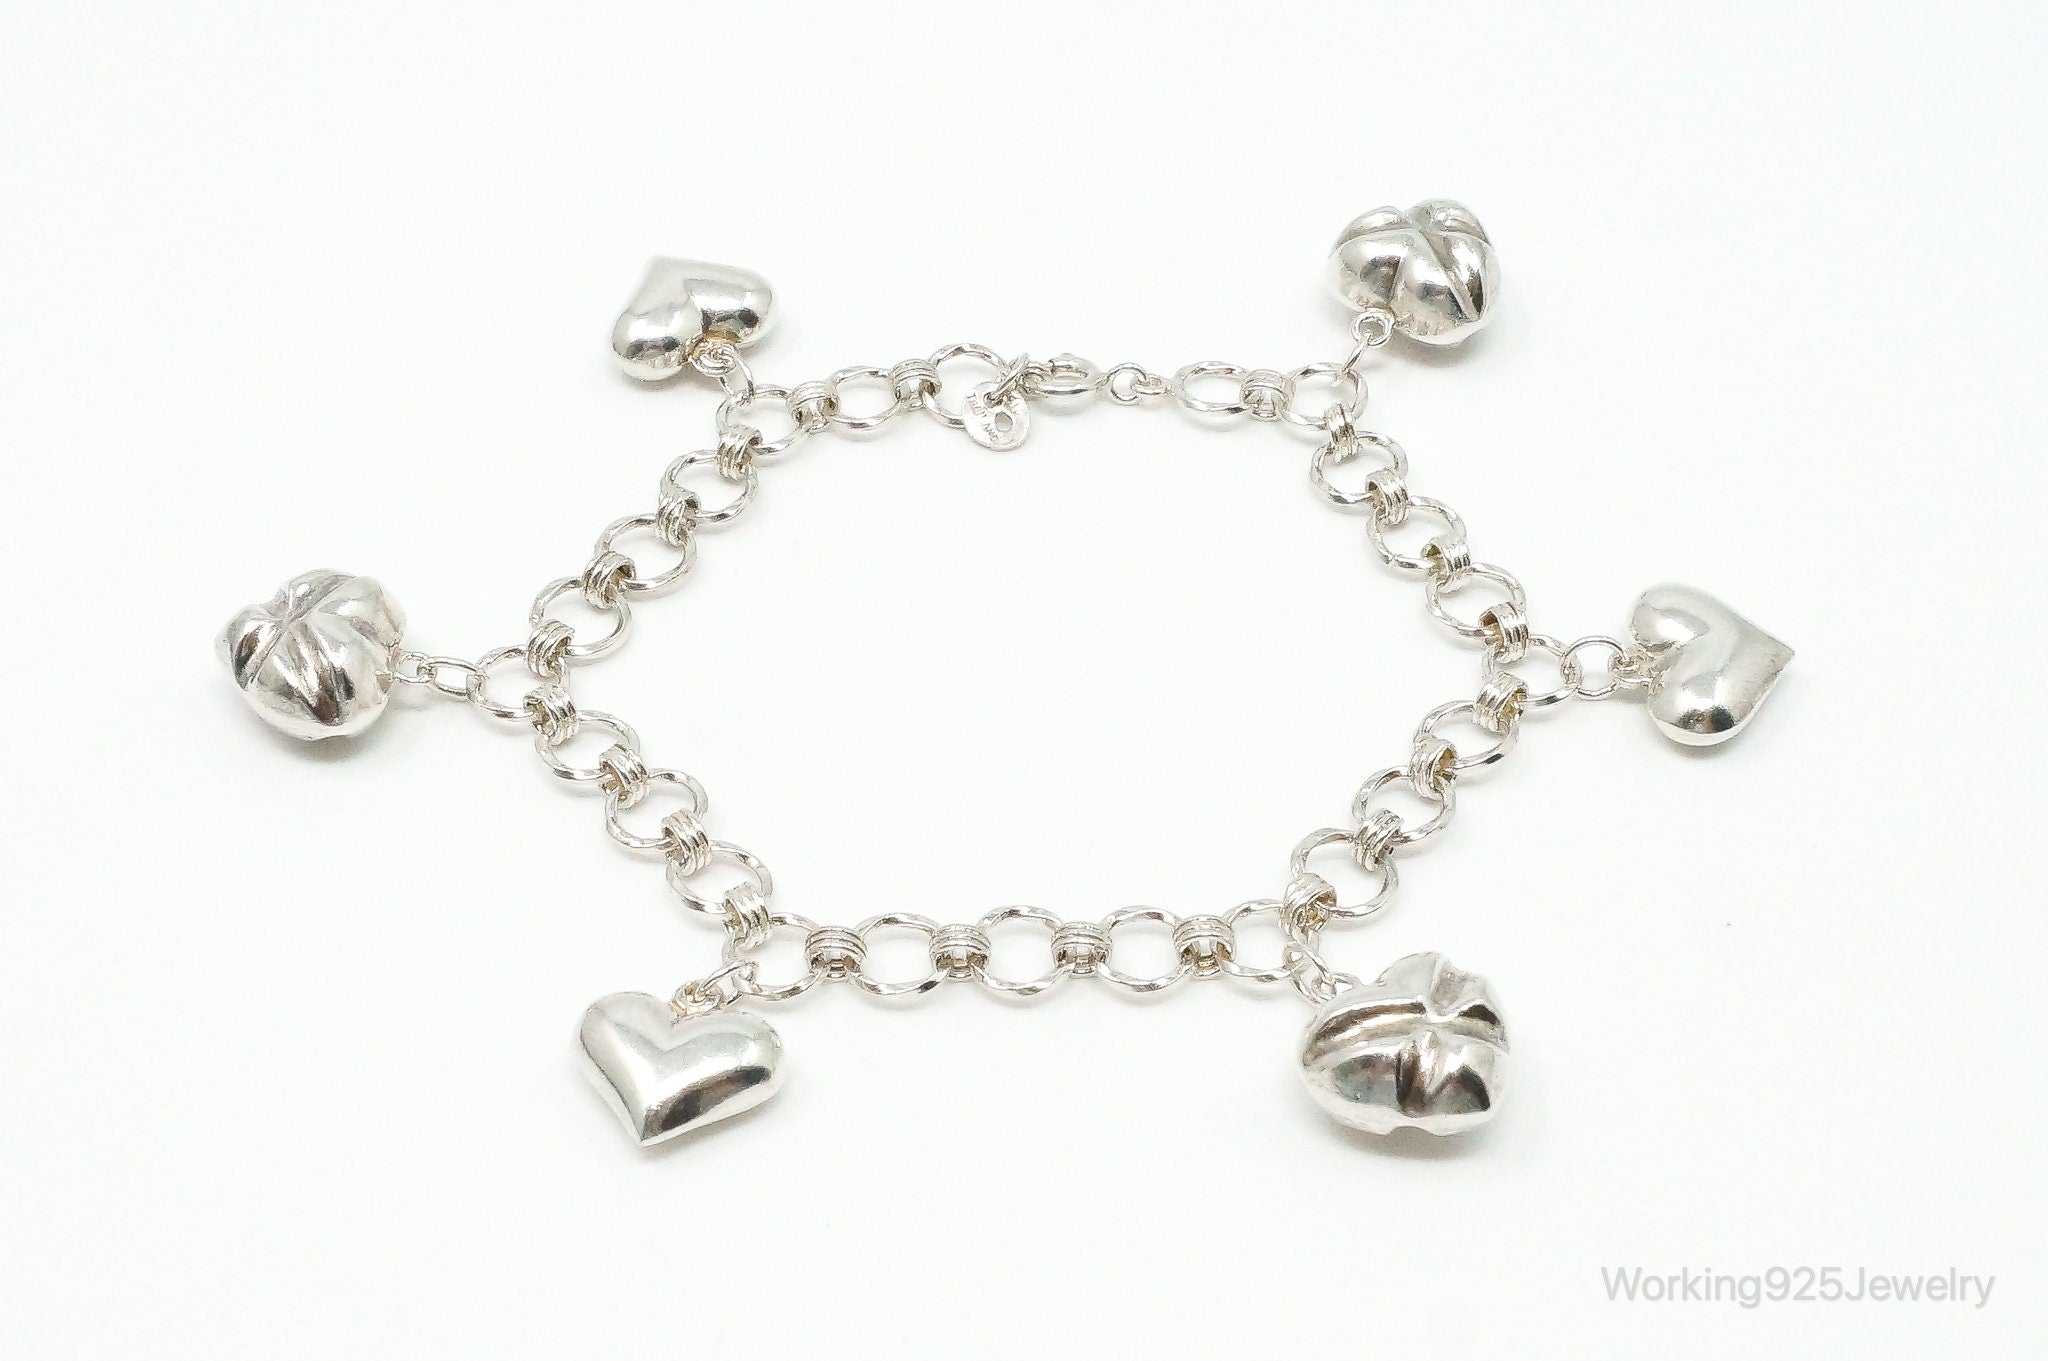 Vintage Puffy Heart Charm Sterling Silver Chain Bracelet